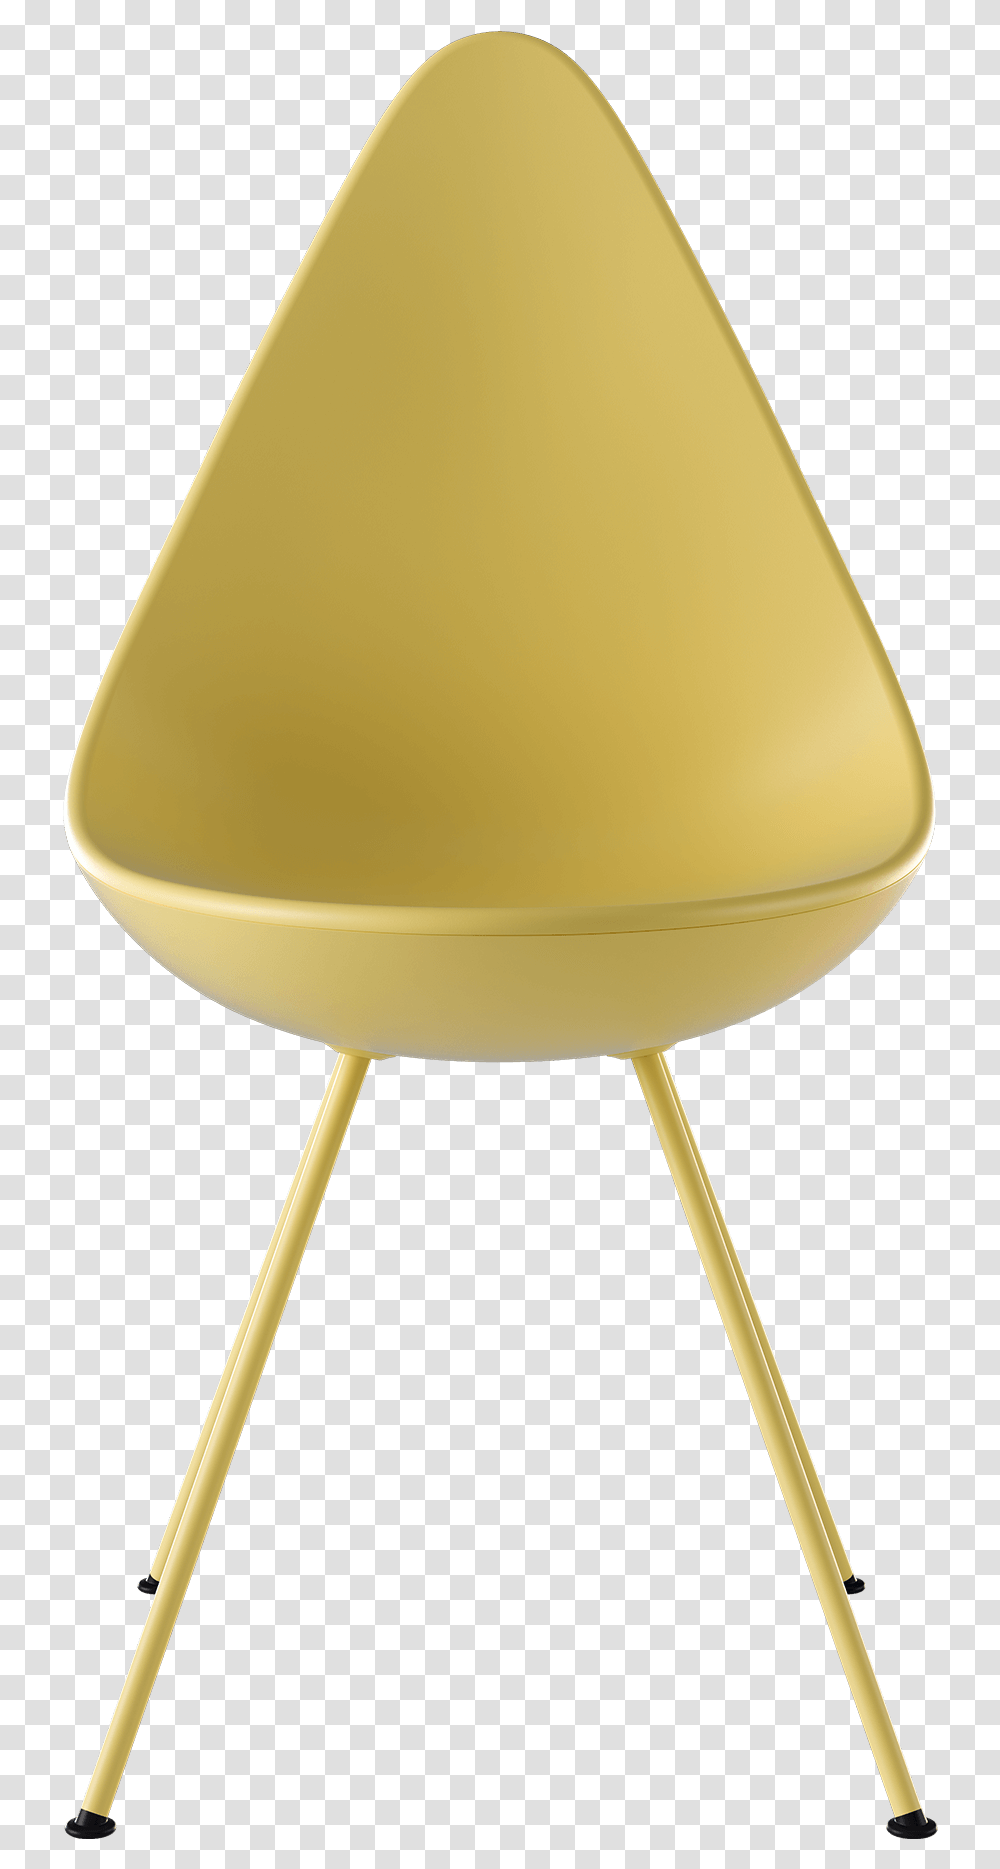 The Drop Chair By Arne Jacobsen In The Color Gen Z Silla Drop, Lamp, Furniture, Wood, Plywood Transparent Png